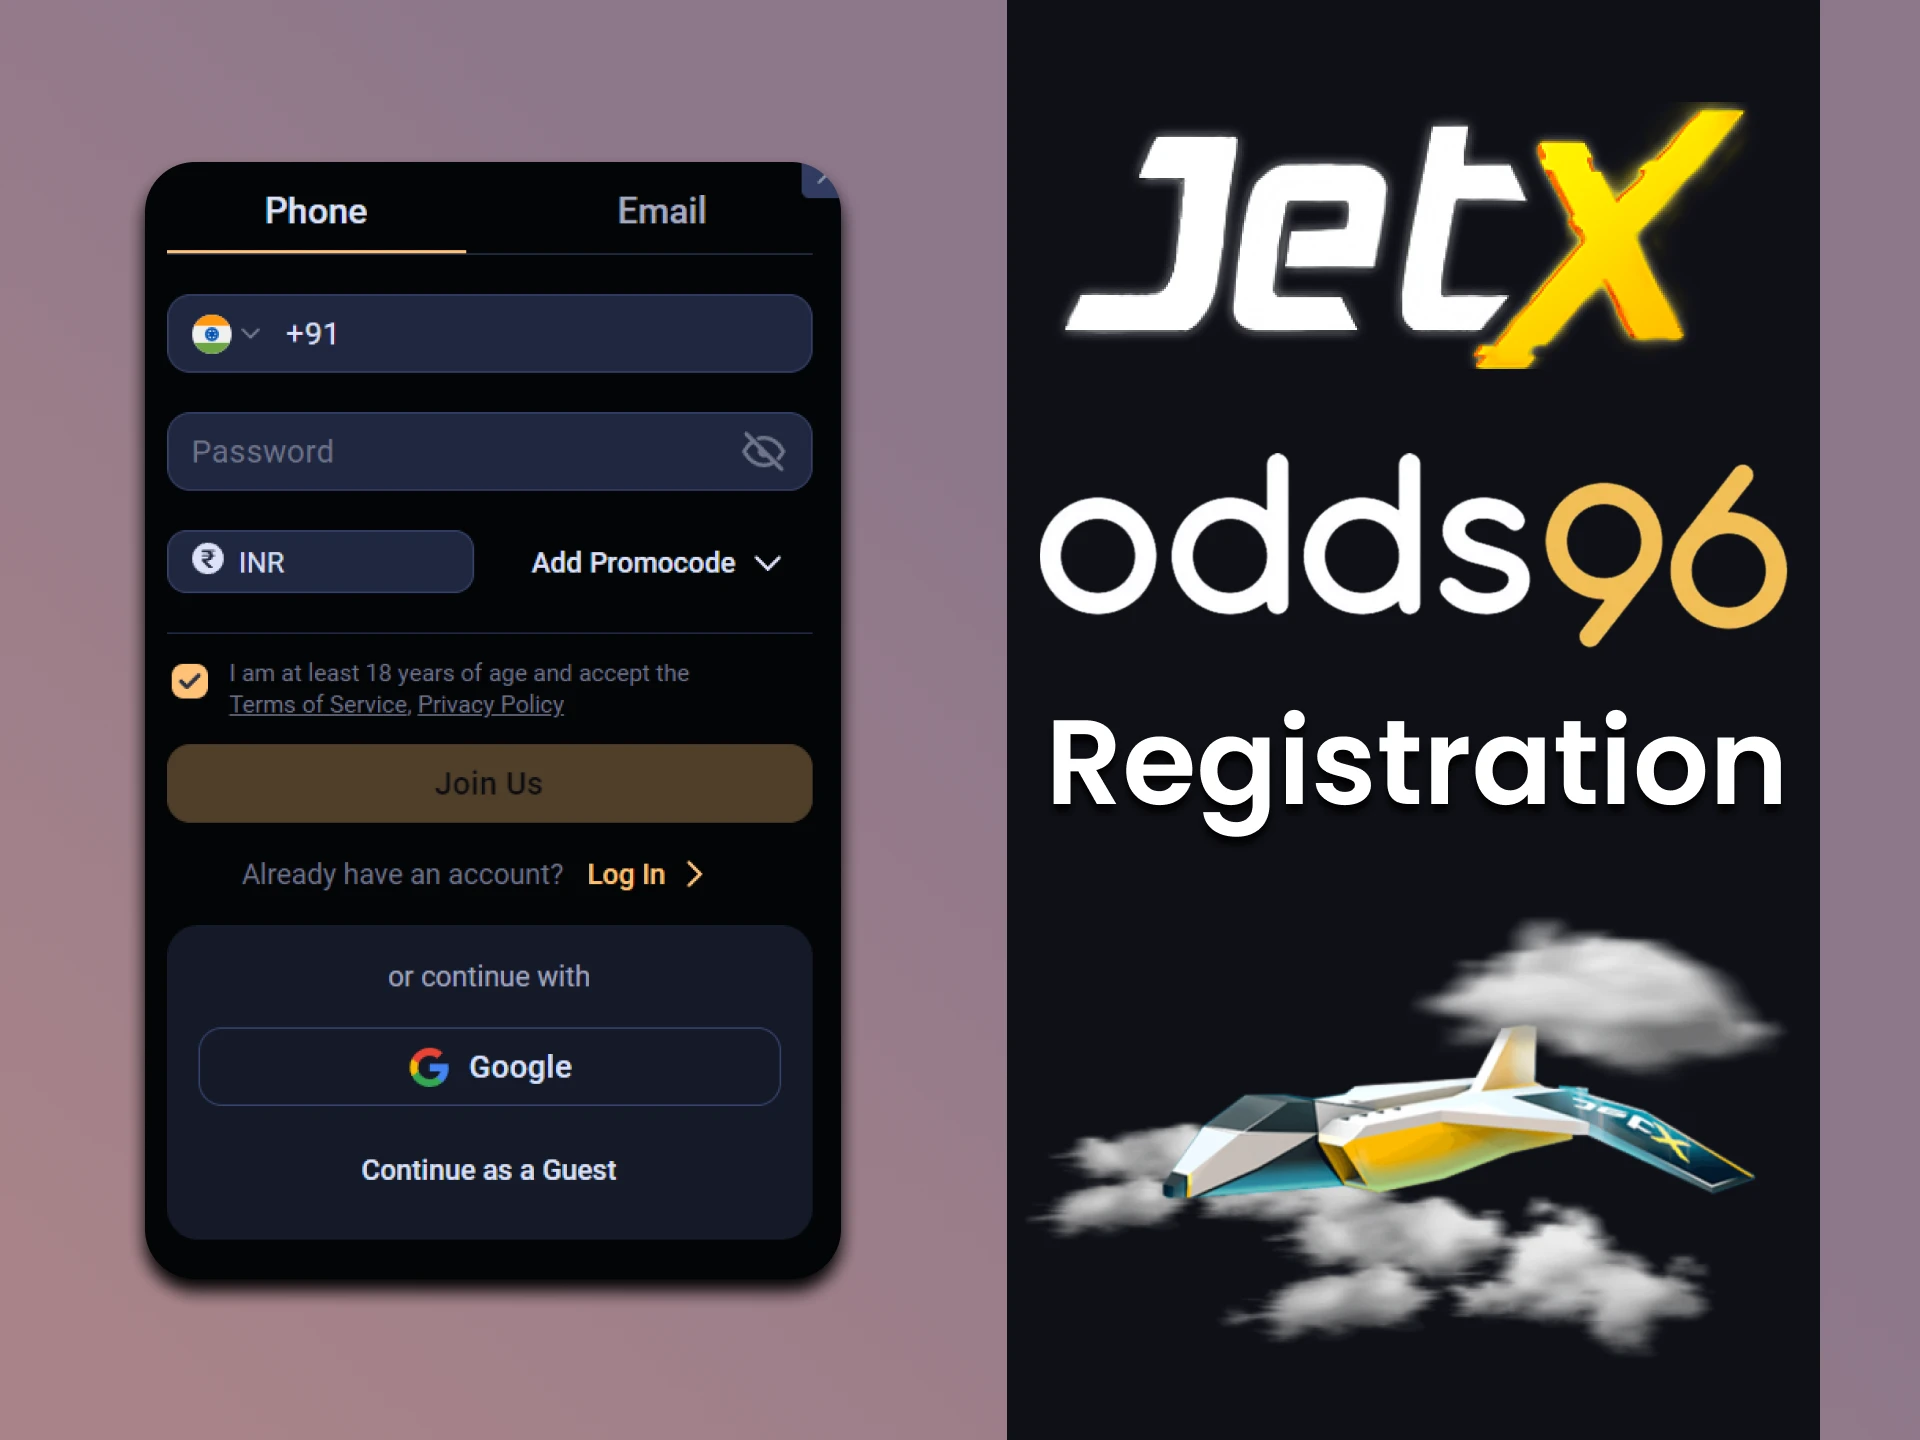 We will walk you through the process of registering on Odds96 to play JetX.